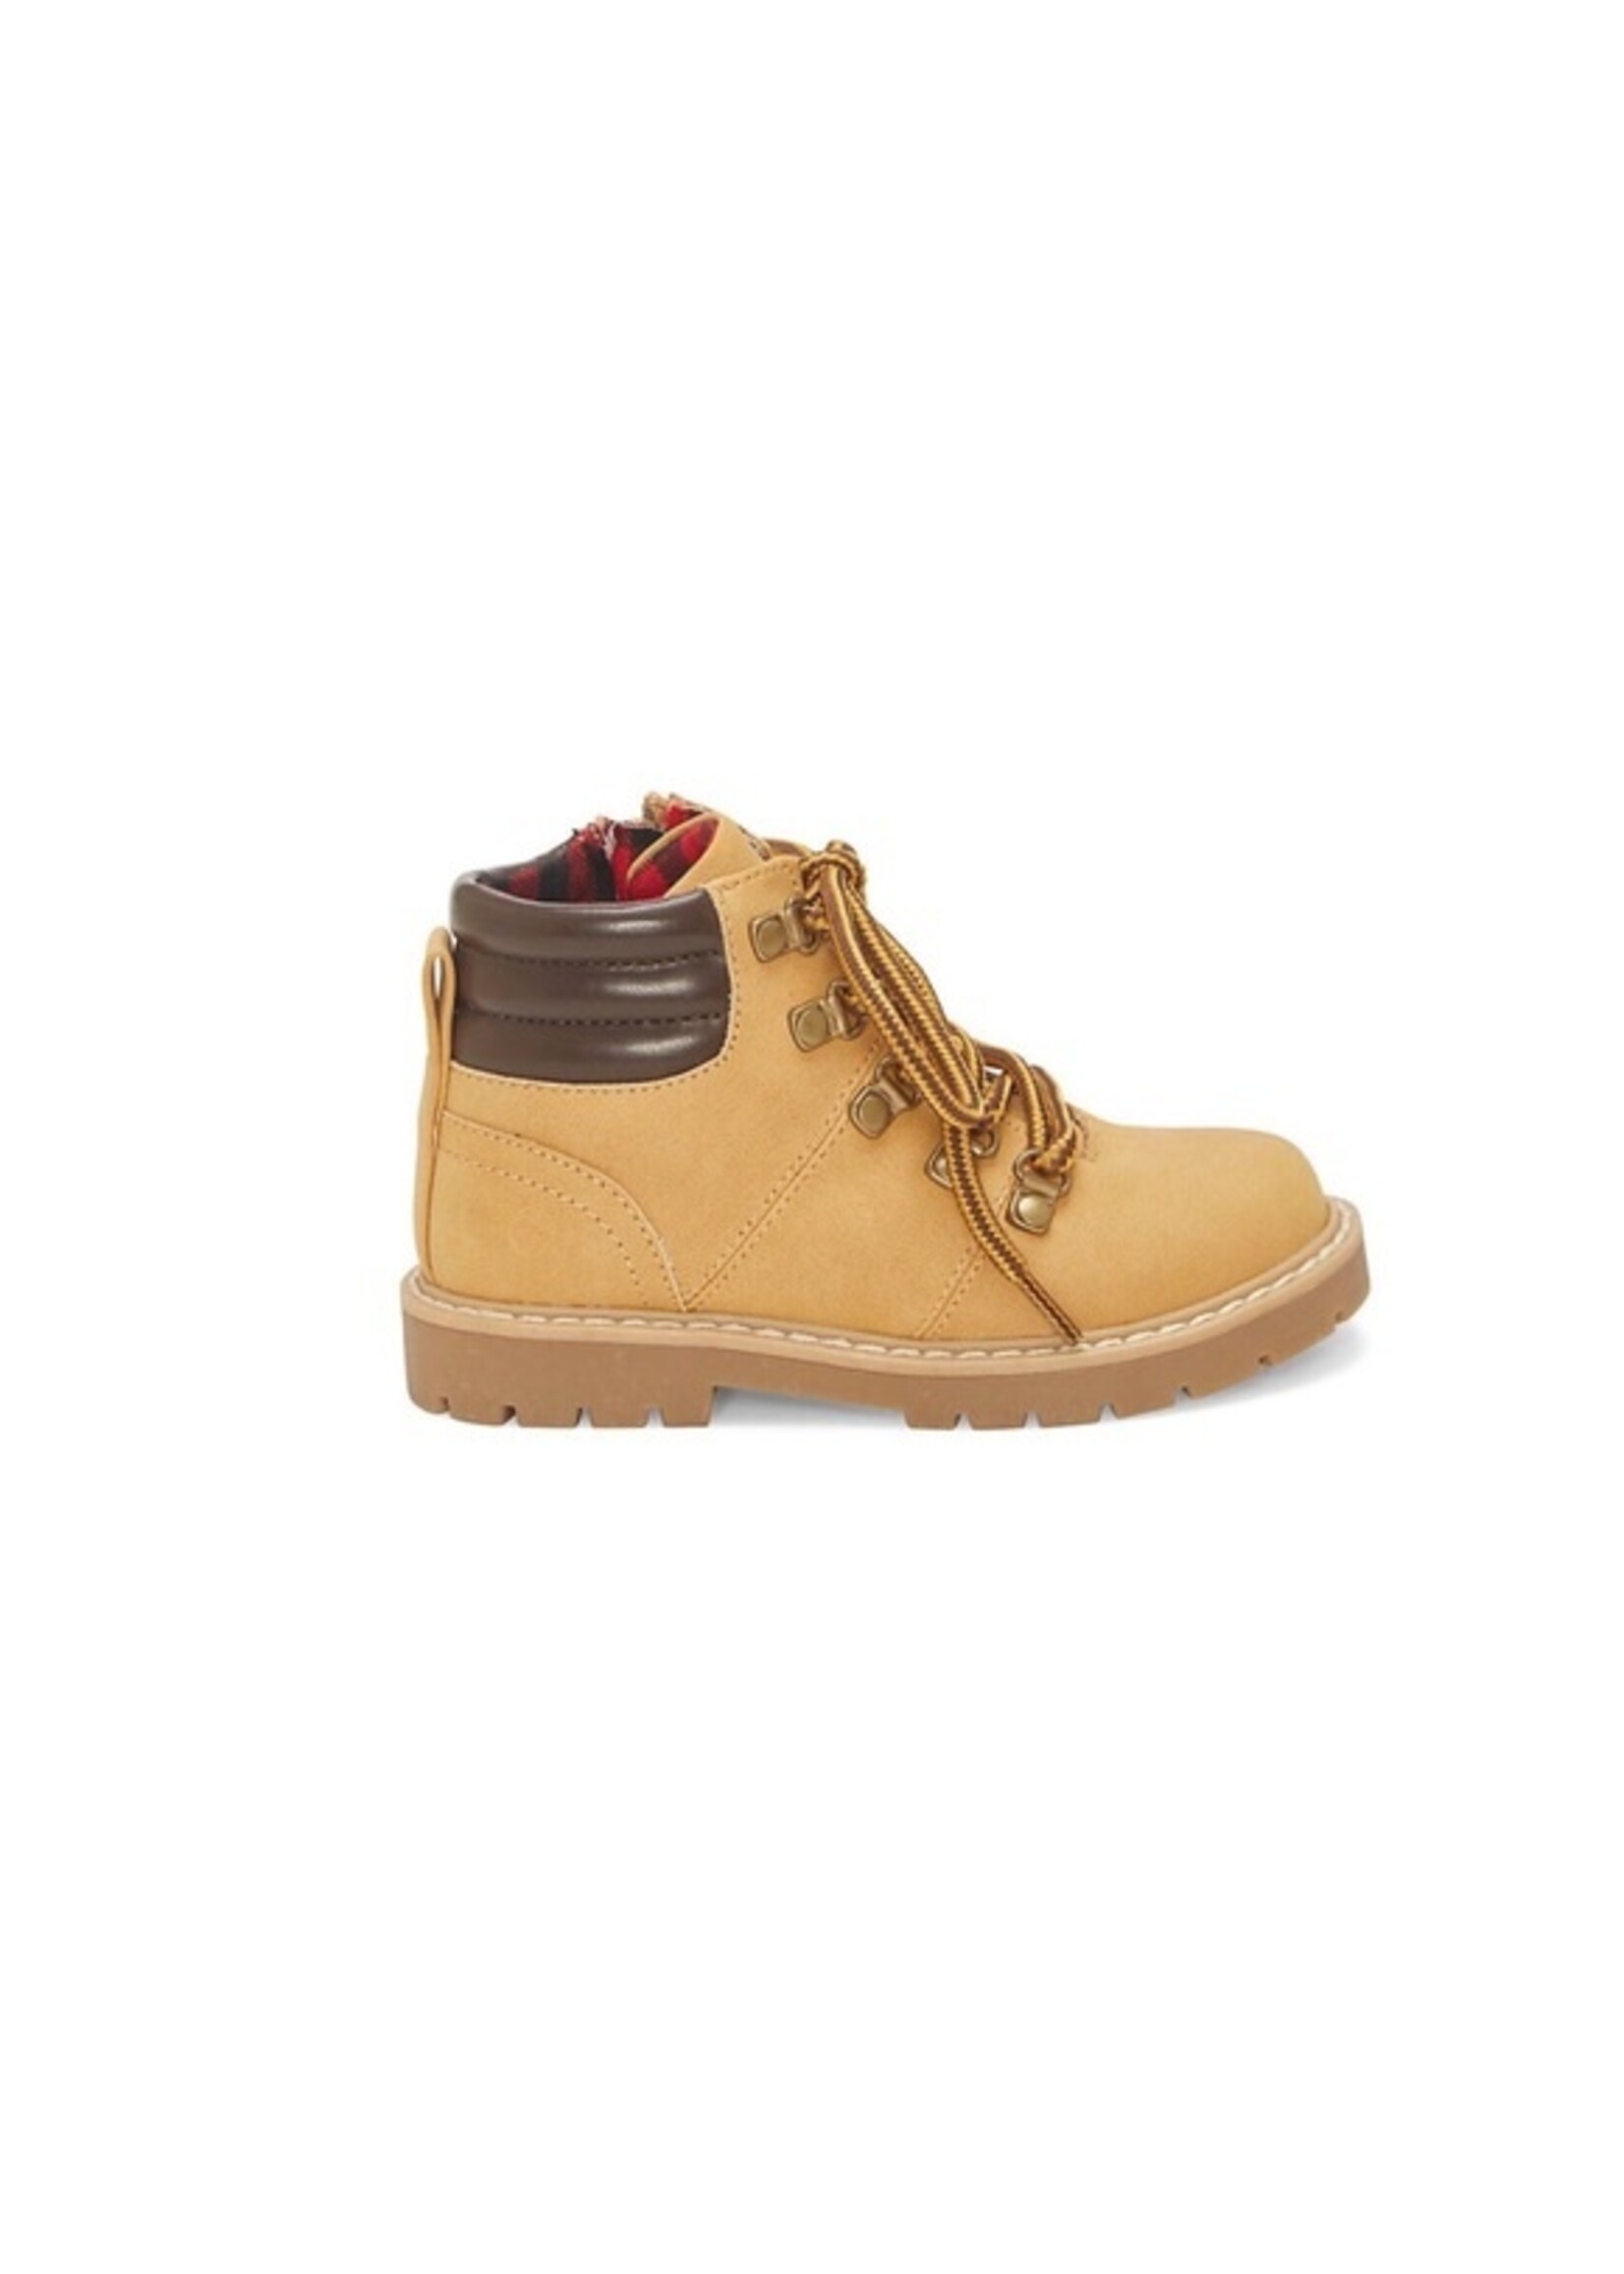 SolePlay Toddler Honey Hiker Boots